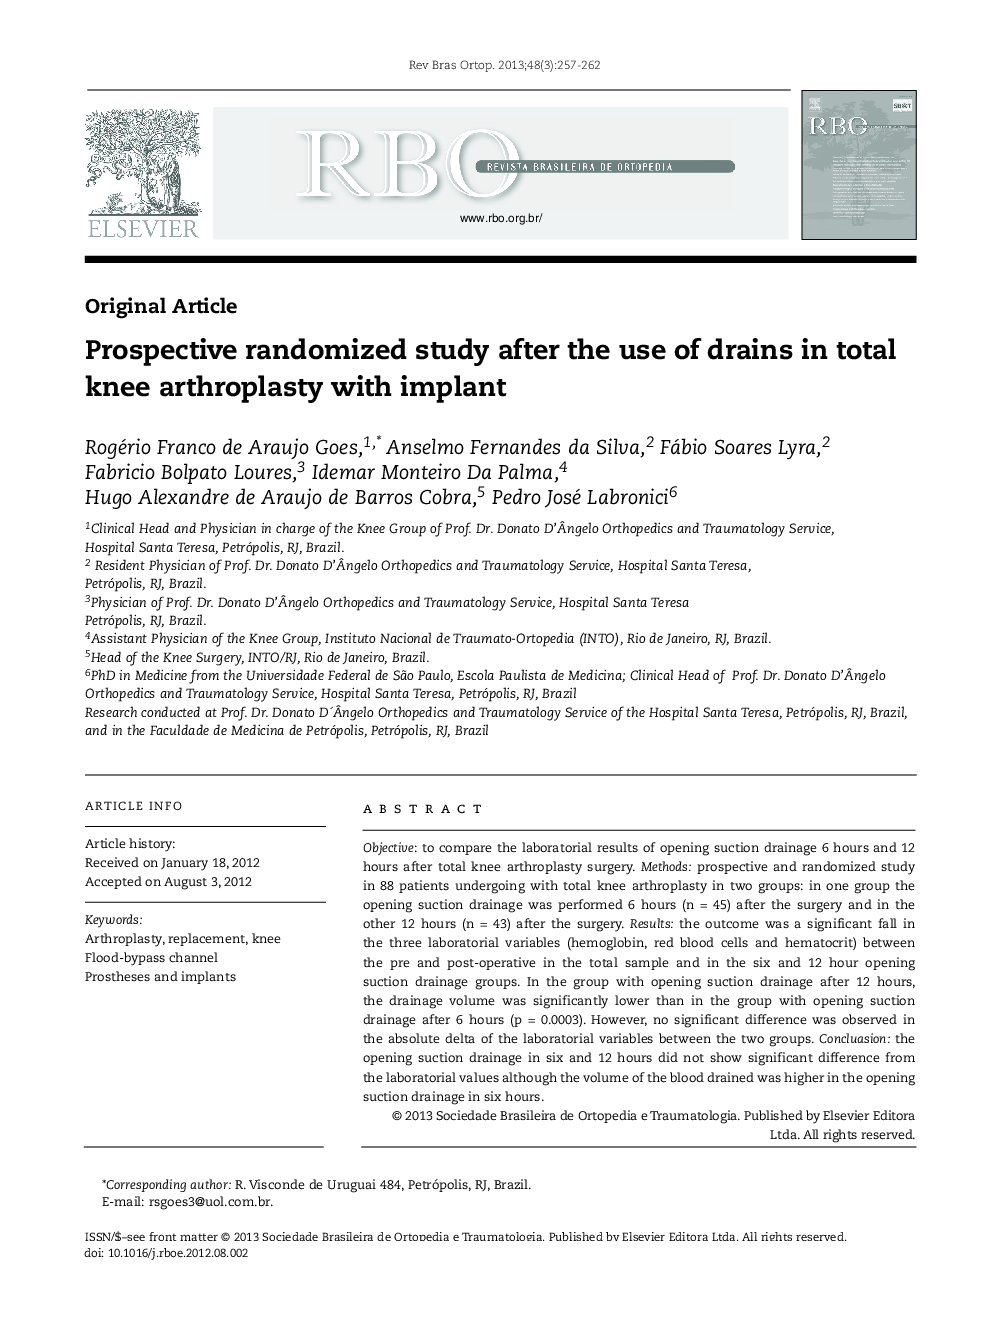 Prospective randomized study after the use of drains in total knee arthroplasty with implant 